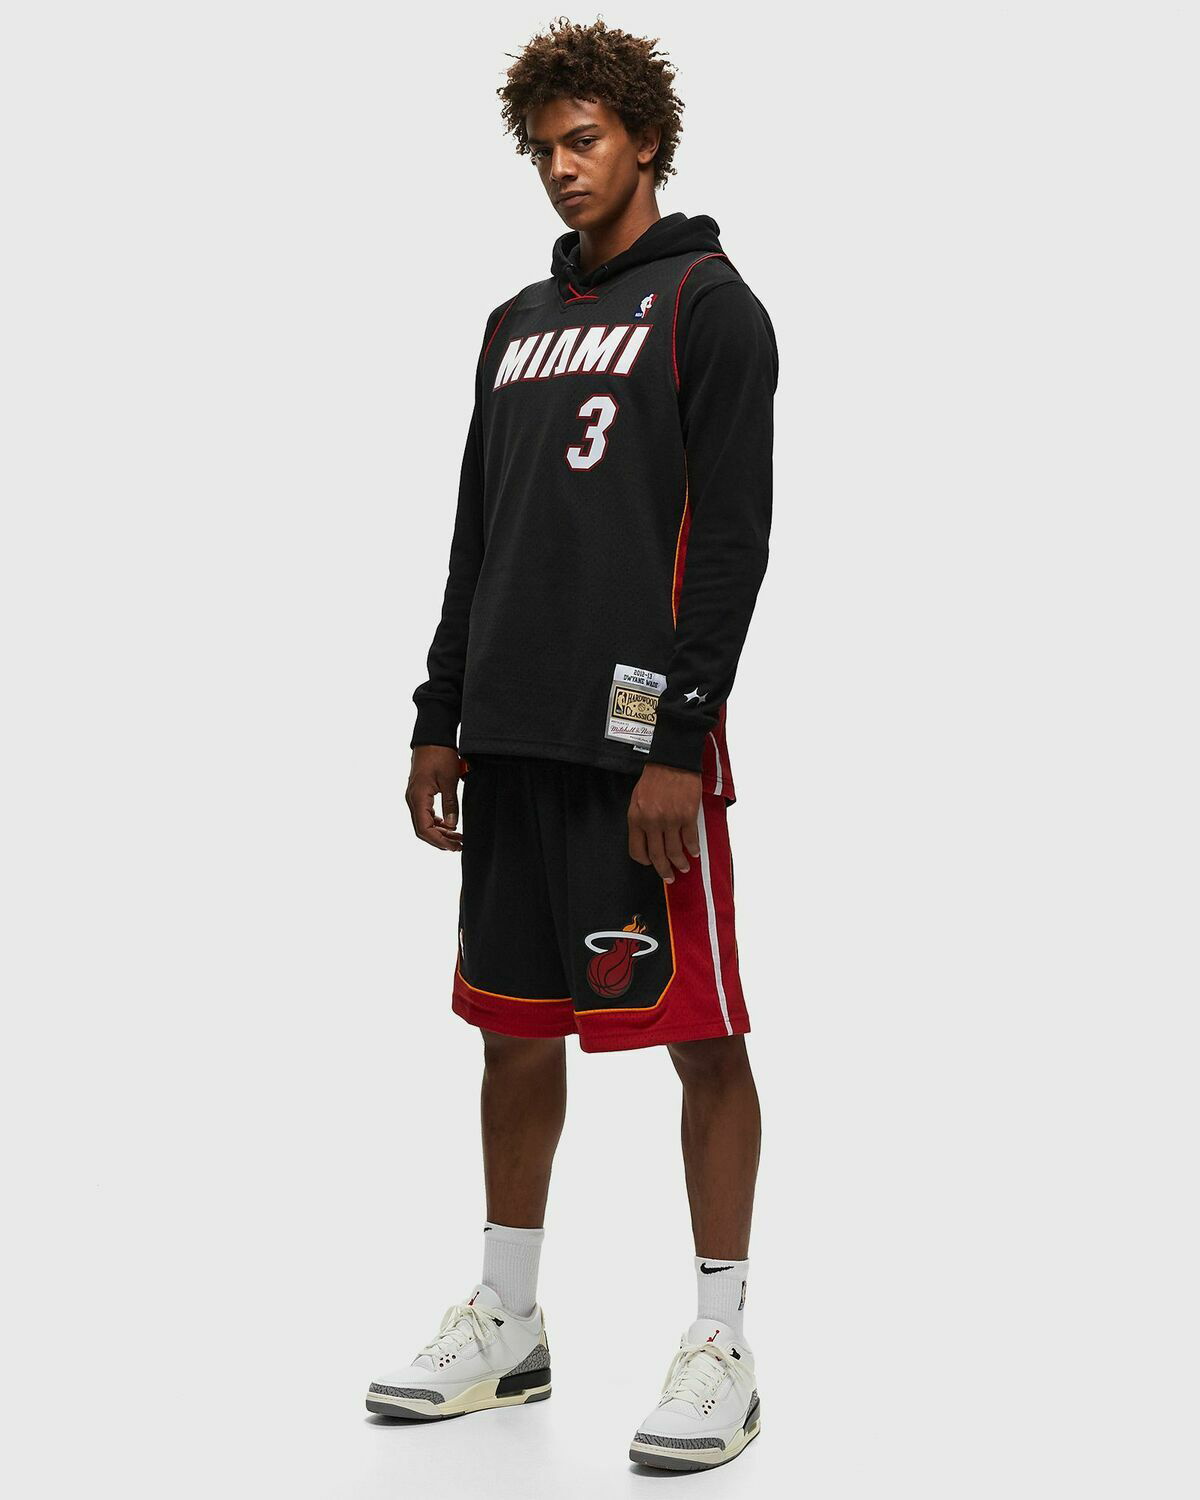 Wade Blue Flame Miami Jersey